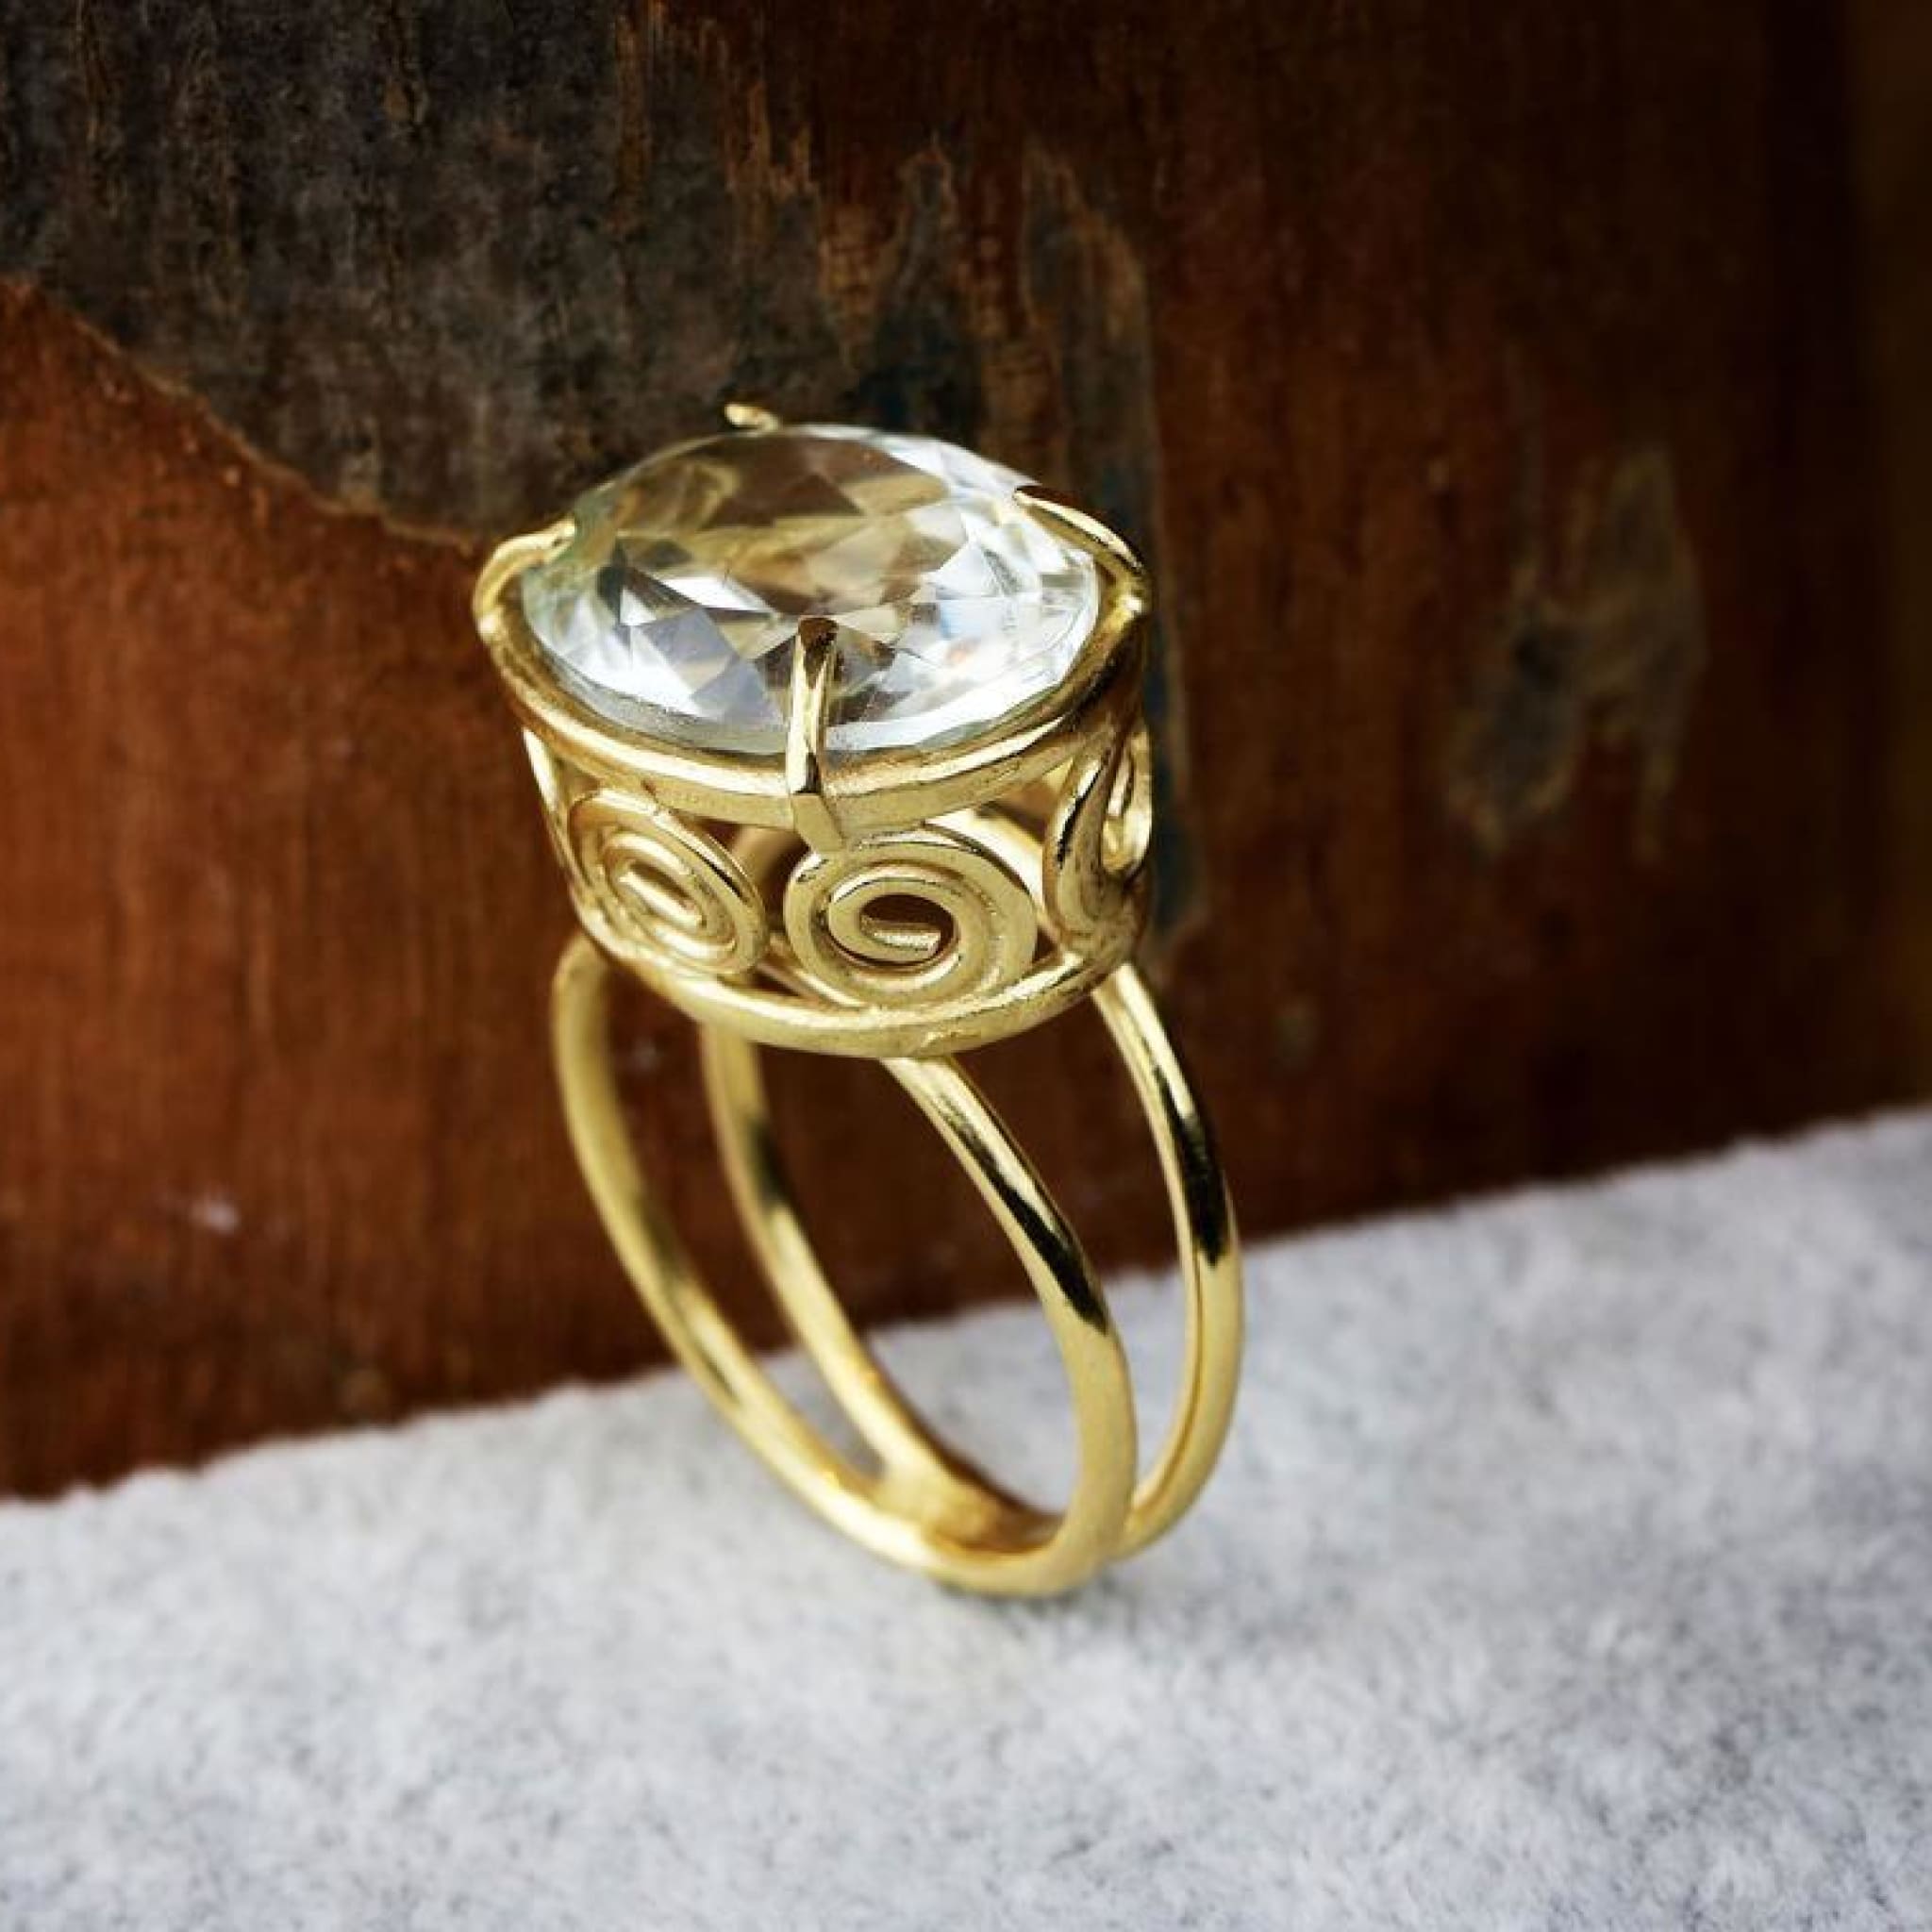 Intricate Womens Gemstone Rings With Clear Quartz